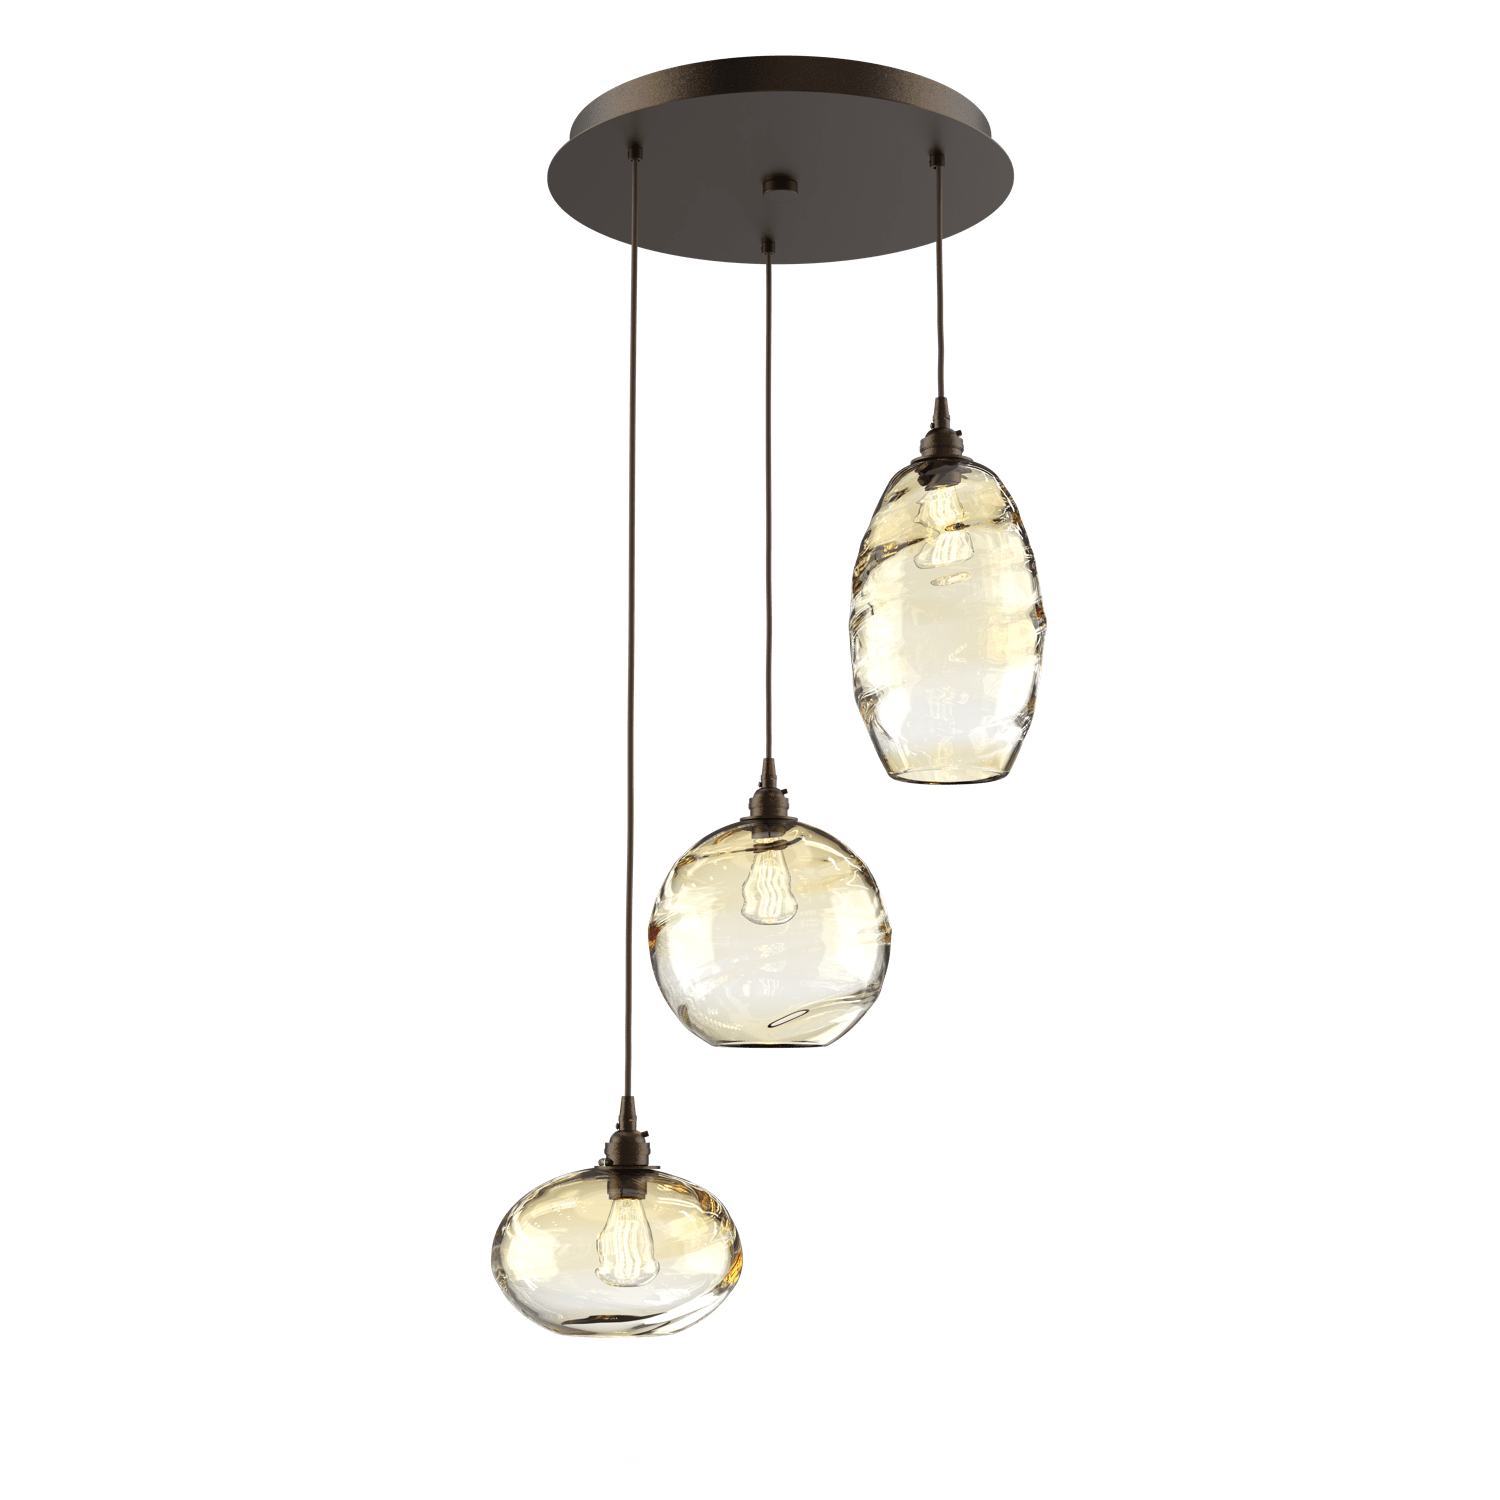 CHB0048-03-FB-OA-Hammerton-Studio-Optic-Blown-Glass-Misto-3-light-round-pendant-chandelier-with-flat-bronze-finish-and-optic-amber-blown-glass-shades-and-incandescent-lamping